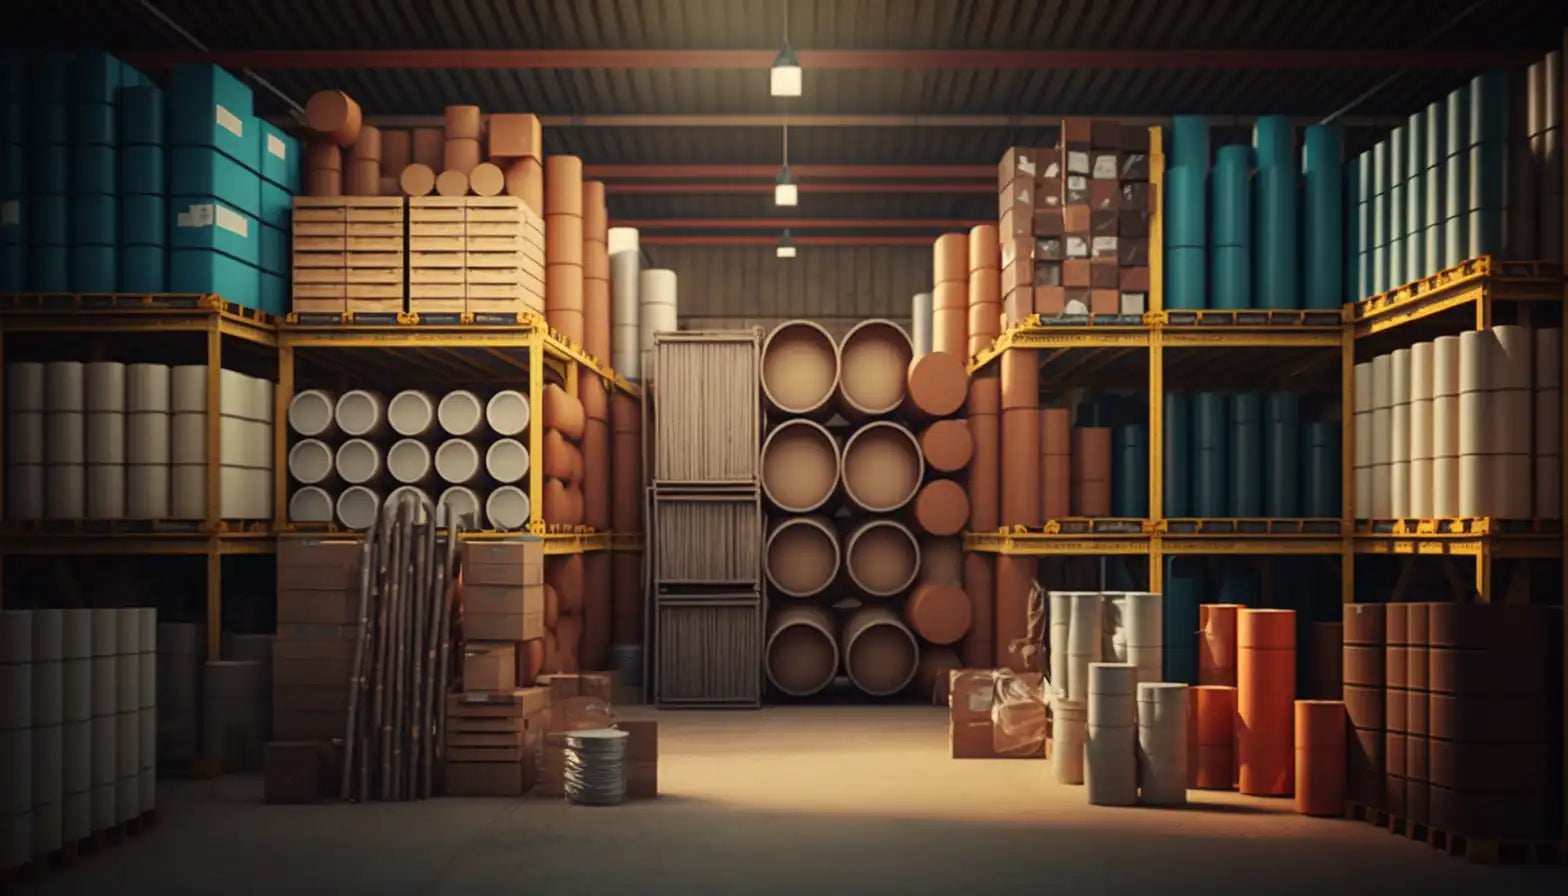 Image of a warehouse holding different types of insulation materials and products stacked neatly on shelves and on the floor.